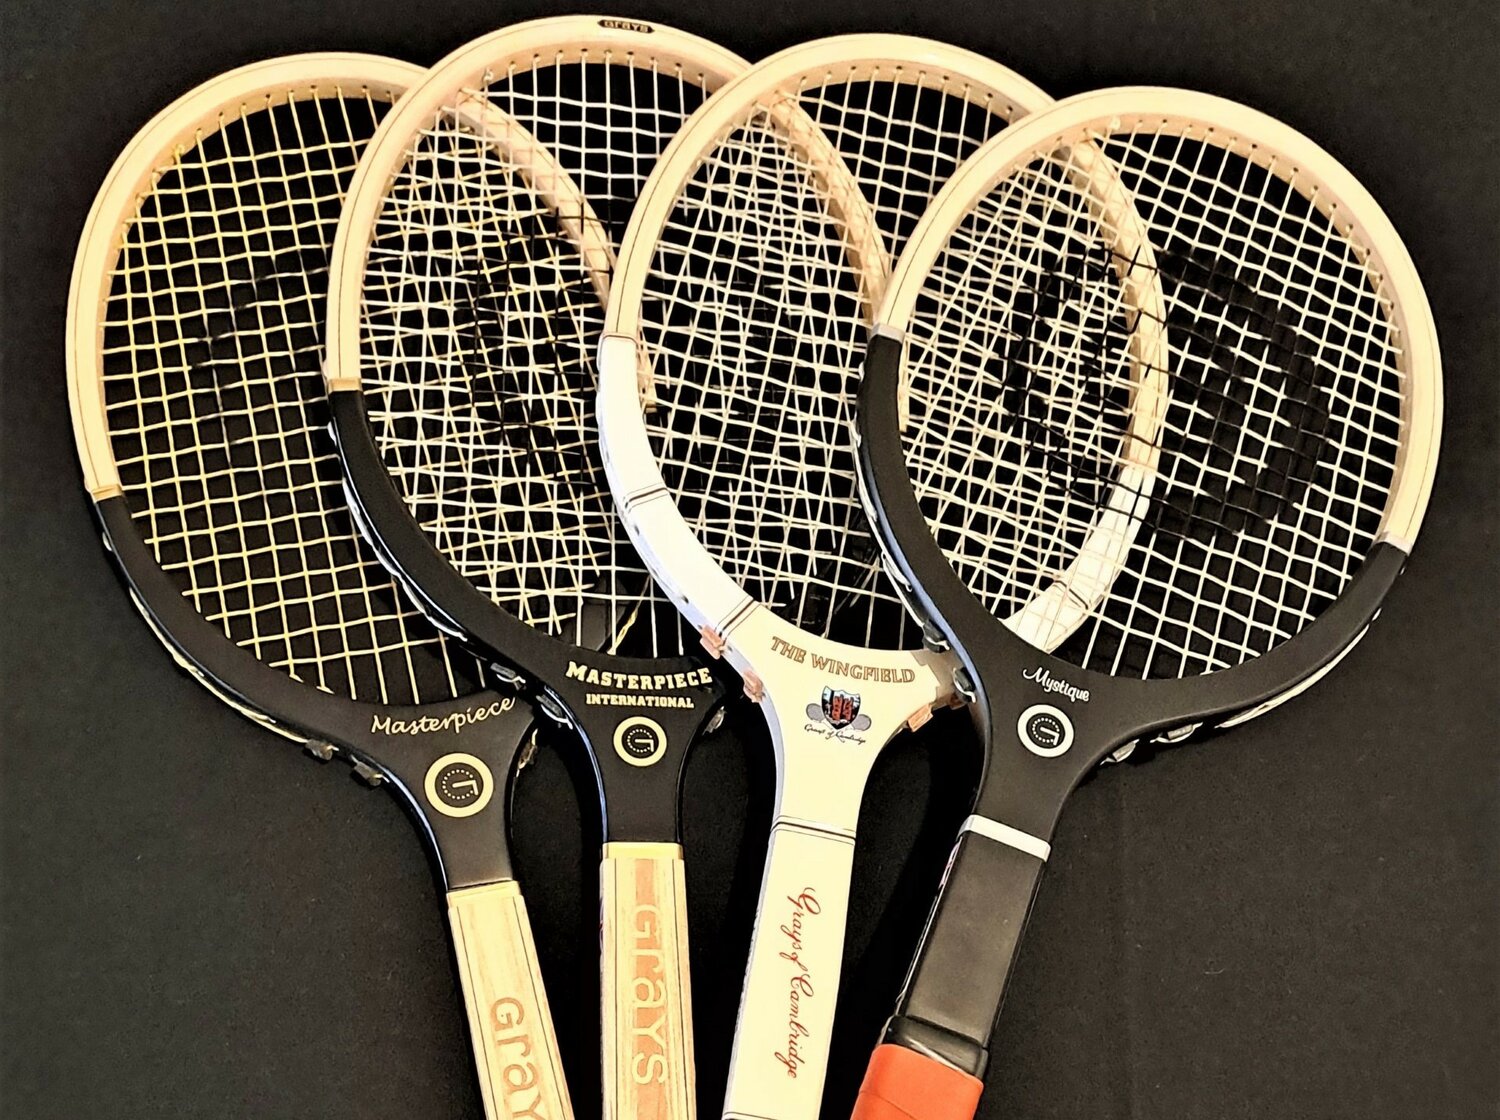 A display of the 4 Grays tennis racquet models brought out since 2019. Based in Cambridge, England, Grays has restarted their production after a 30-year absence.